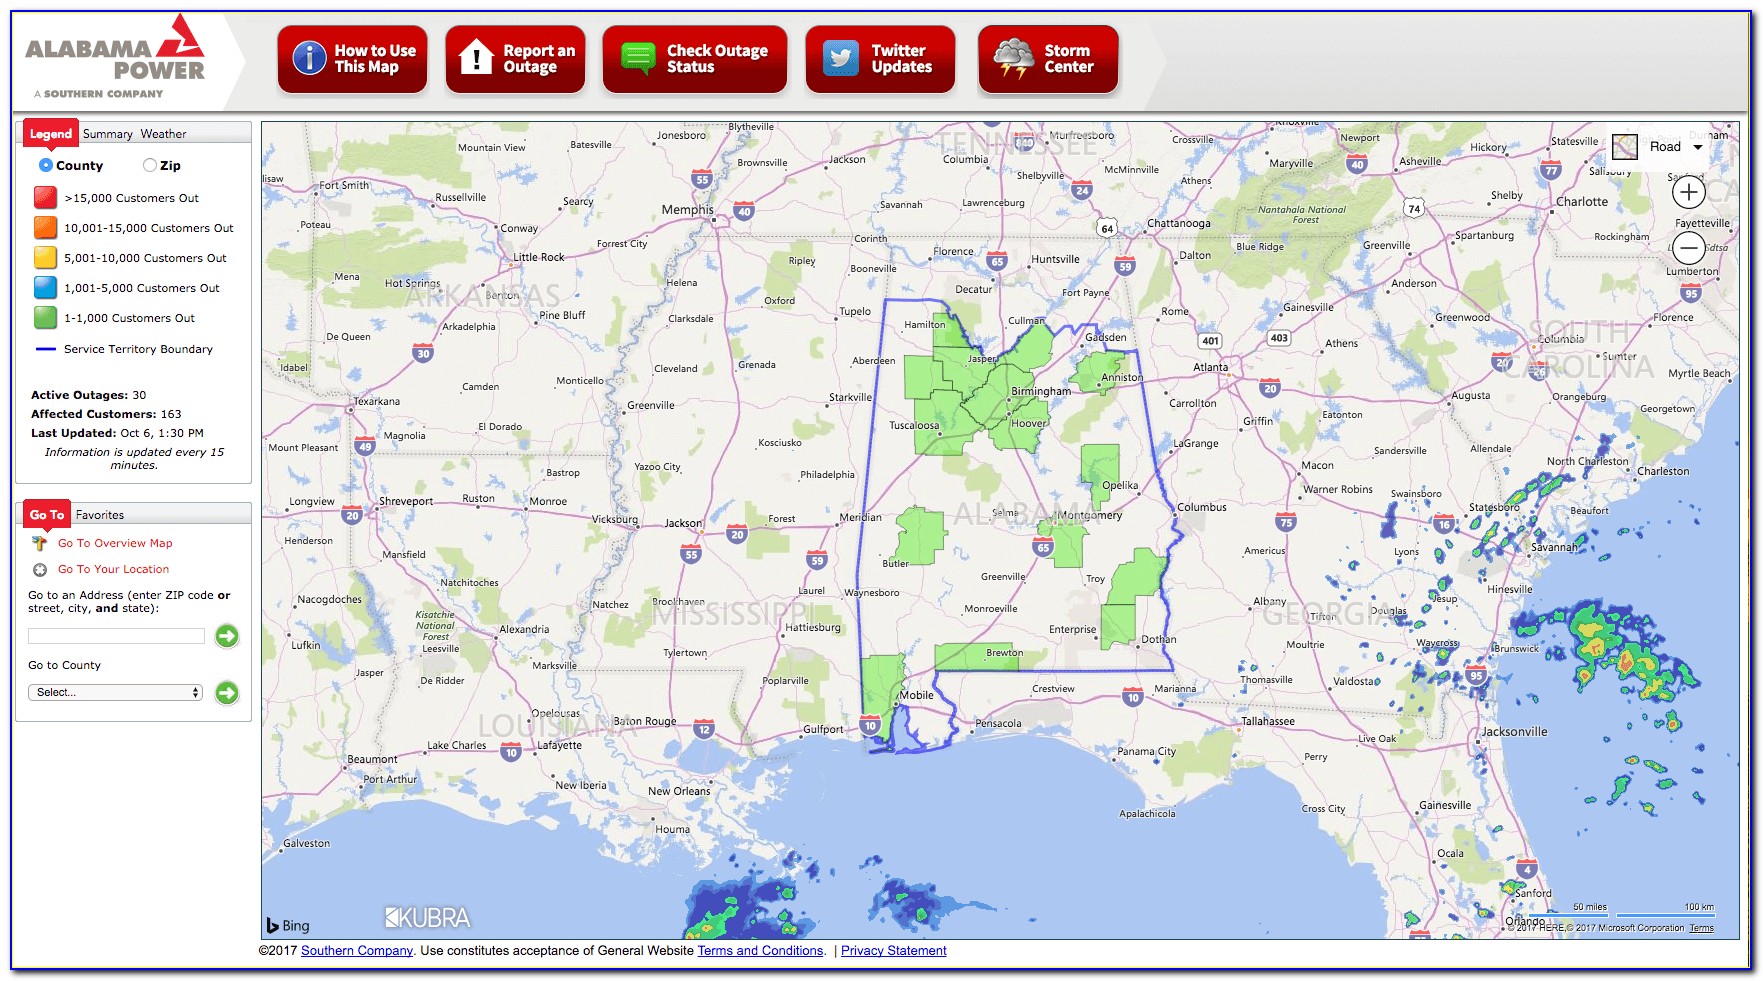 Alabama Power Real Time Outage Map